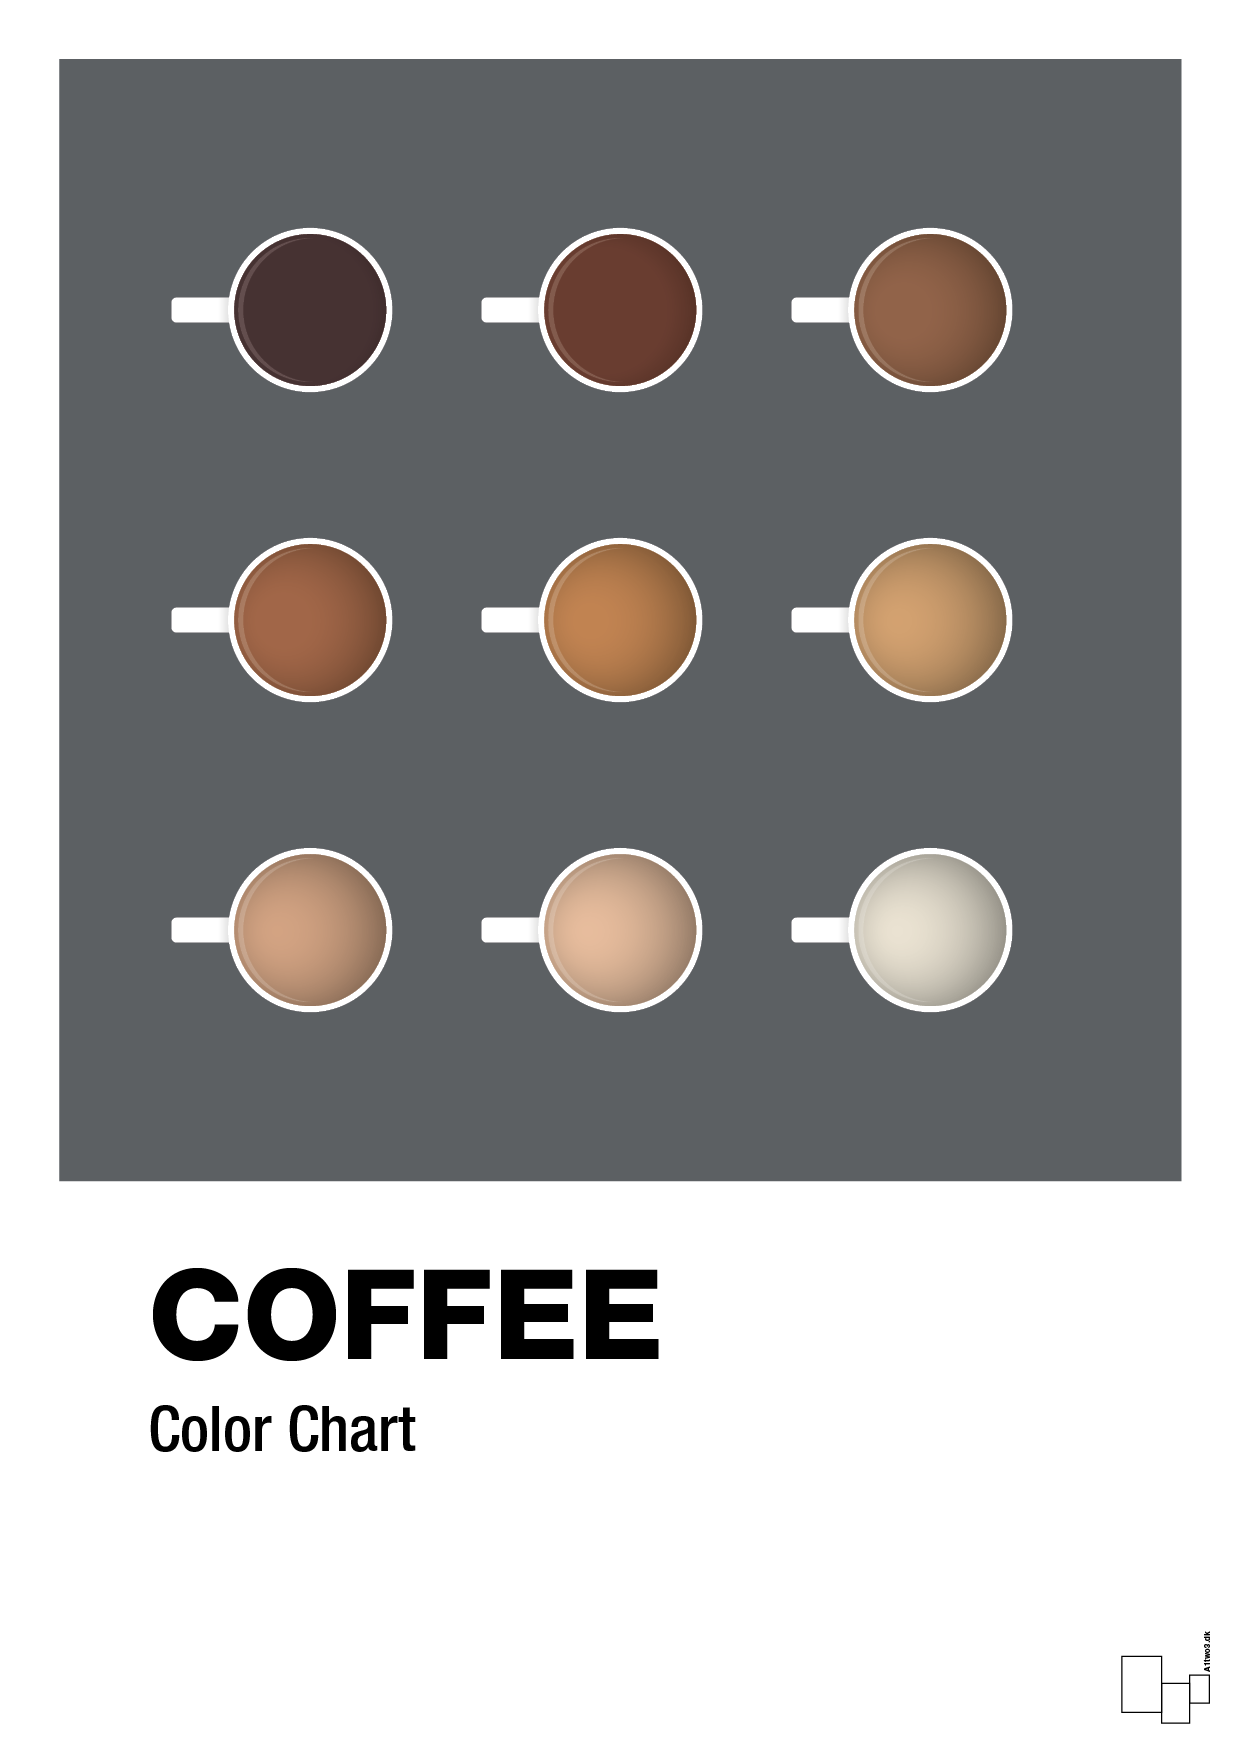 coffee color chart - Plakat med Mad & Drikke i Graphic Charcoal